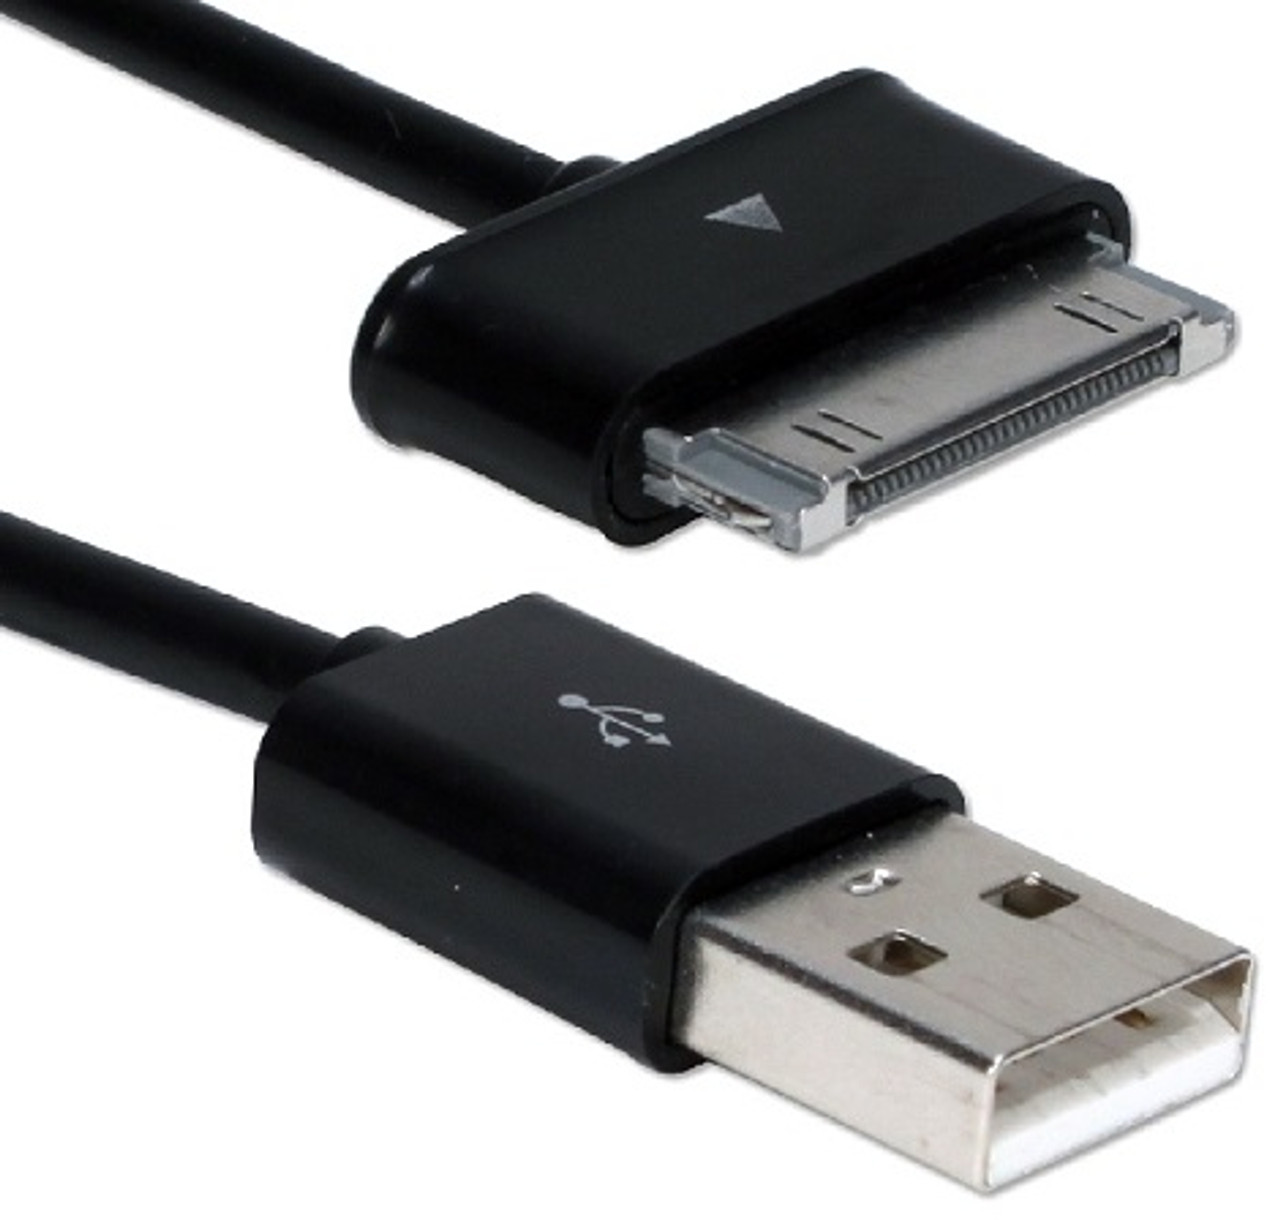 2 Meter USB Sync & 2.1Amp Charger Cable for Samsung Galaxy Tab/Note Tablet  - Not for Apple Products